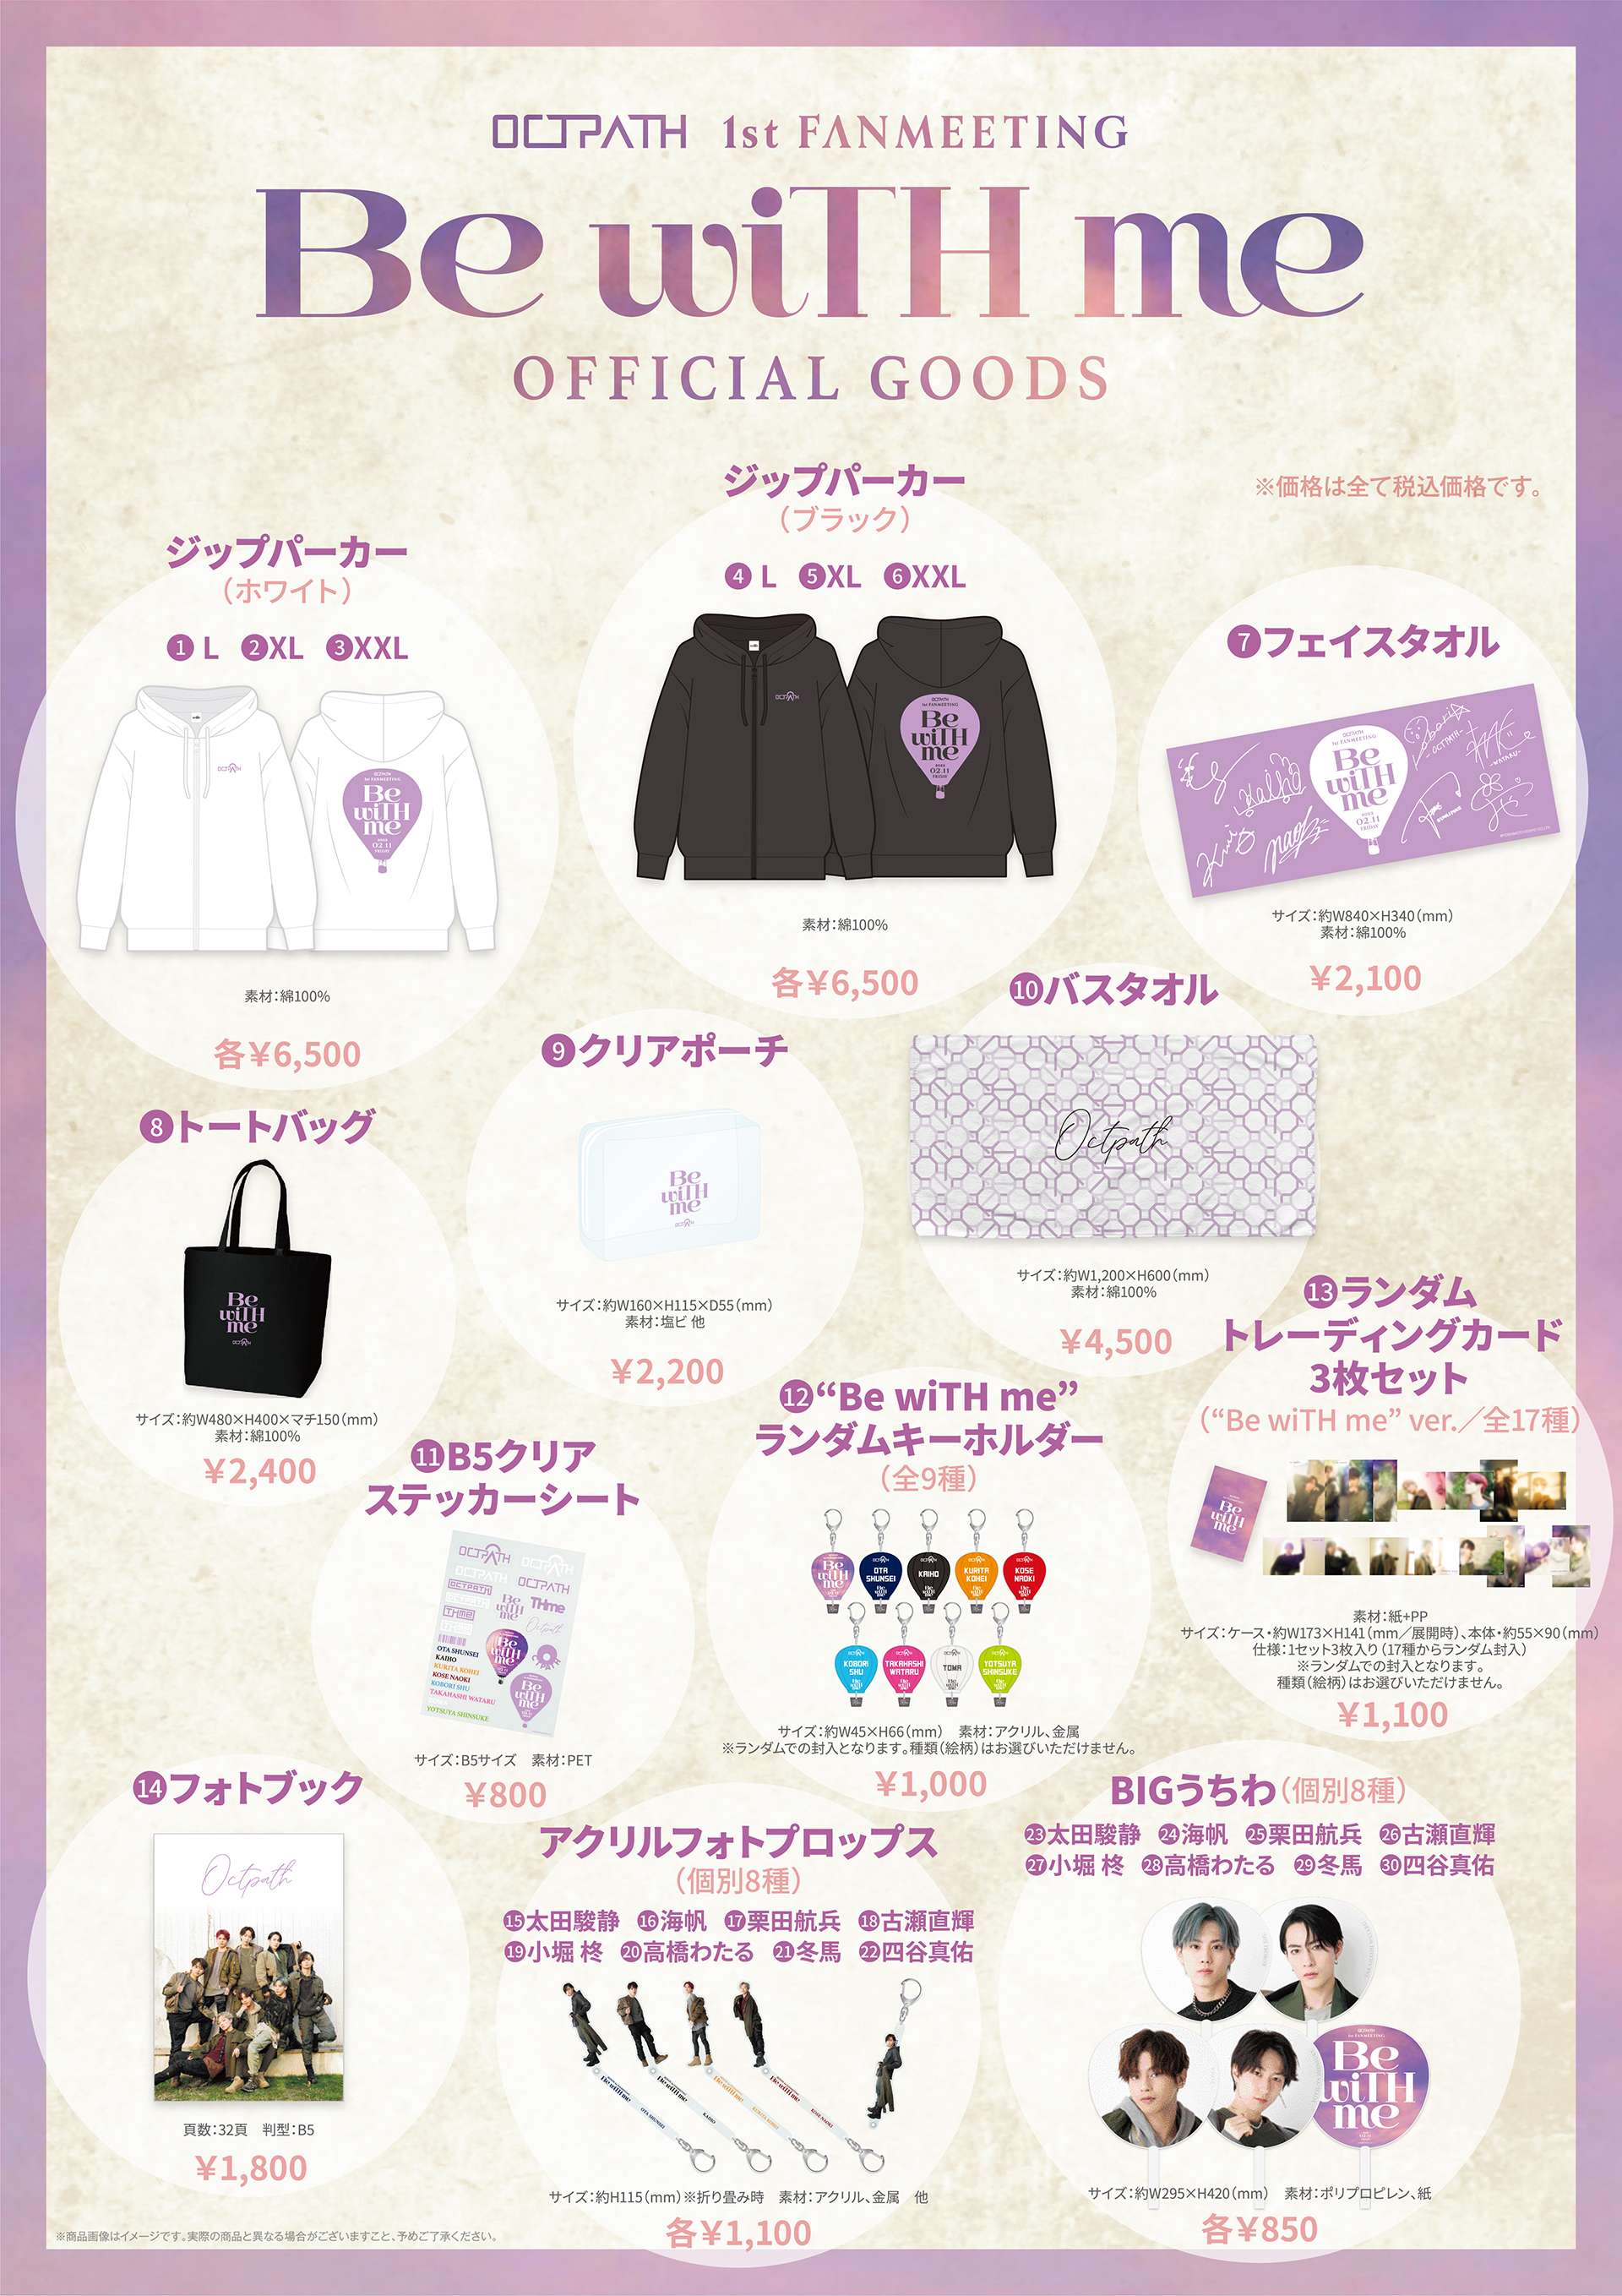 OFFICIAL GOODS】「OCTPATH 1st FANMEETING Be wiTH me」GOODS 2月13日 